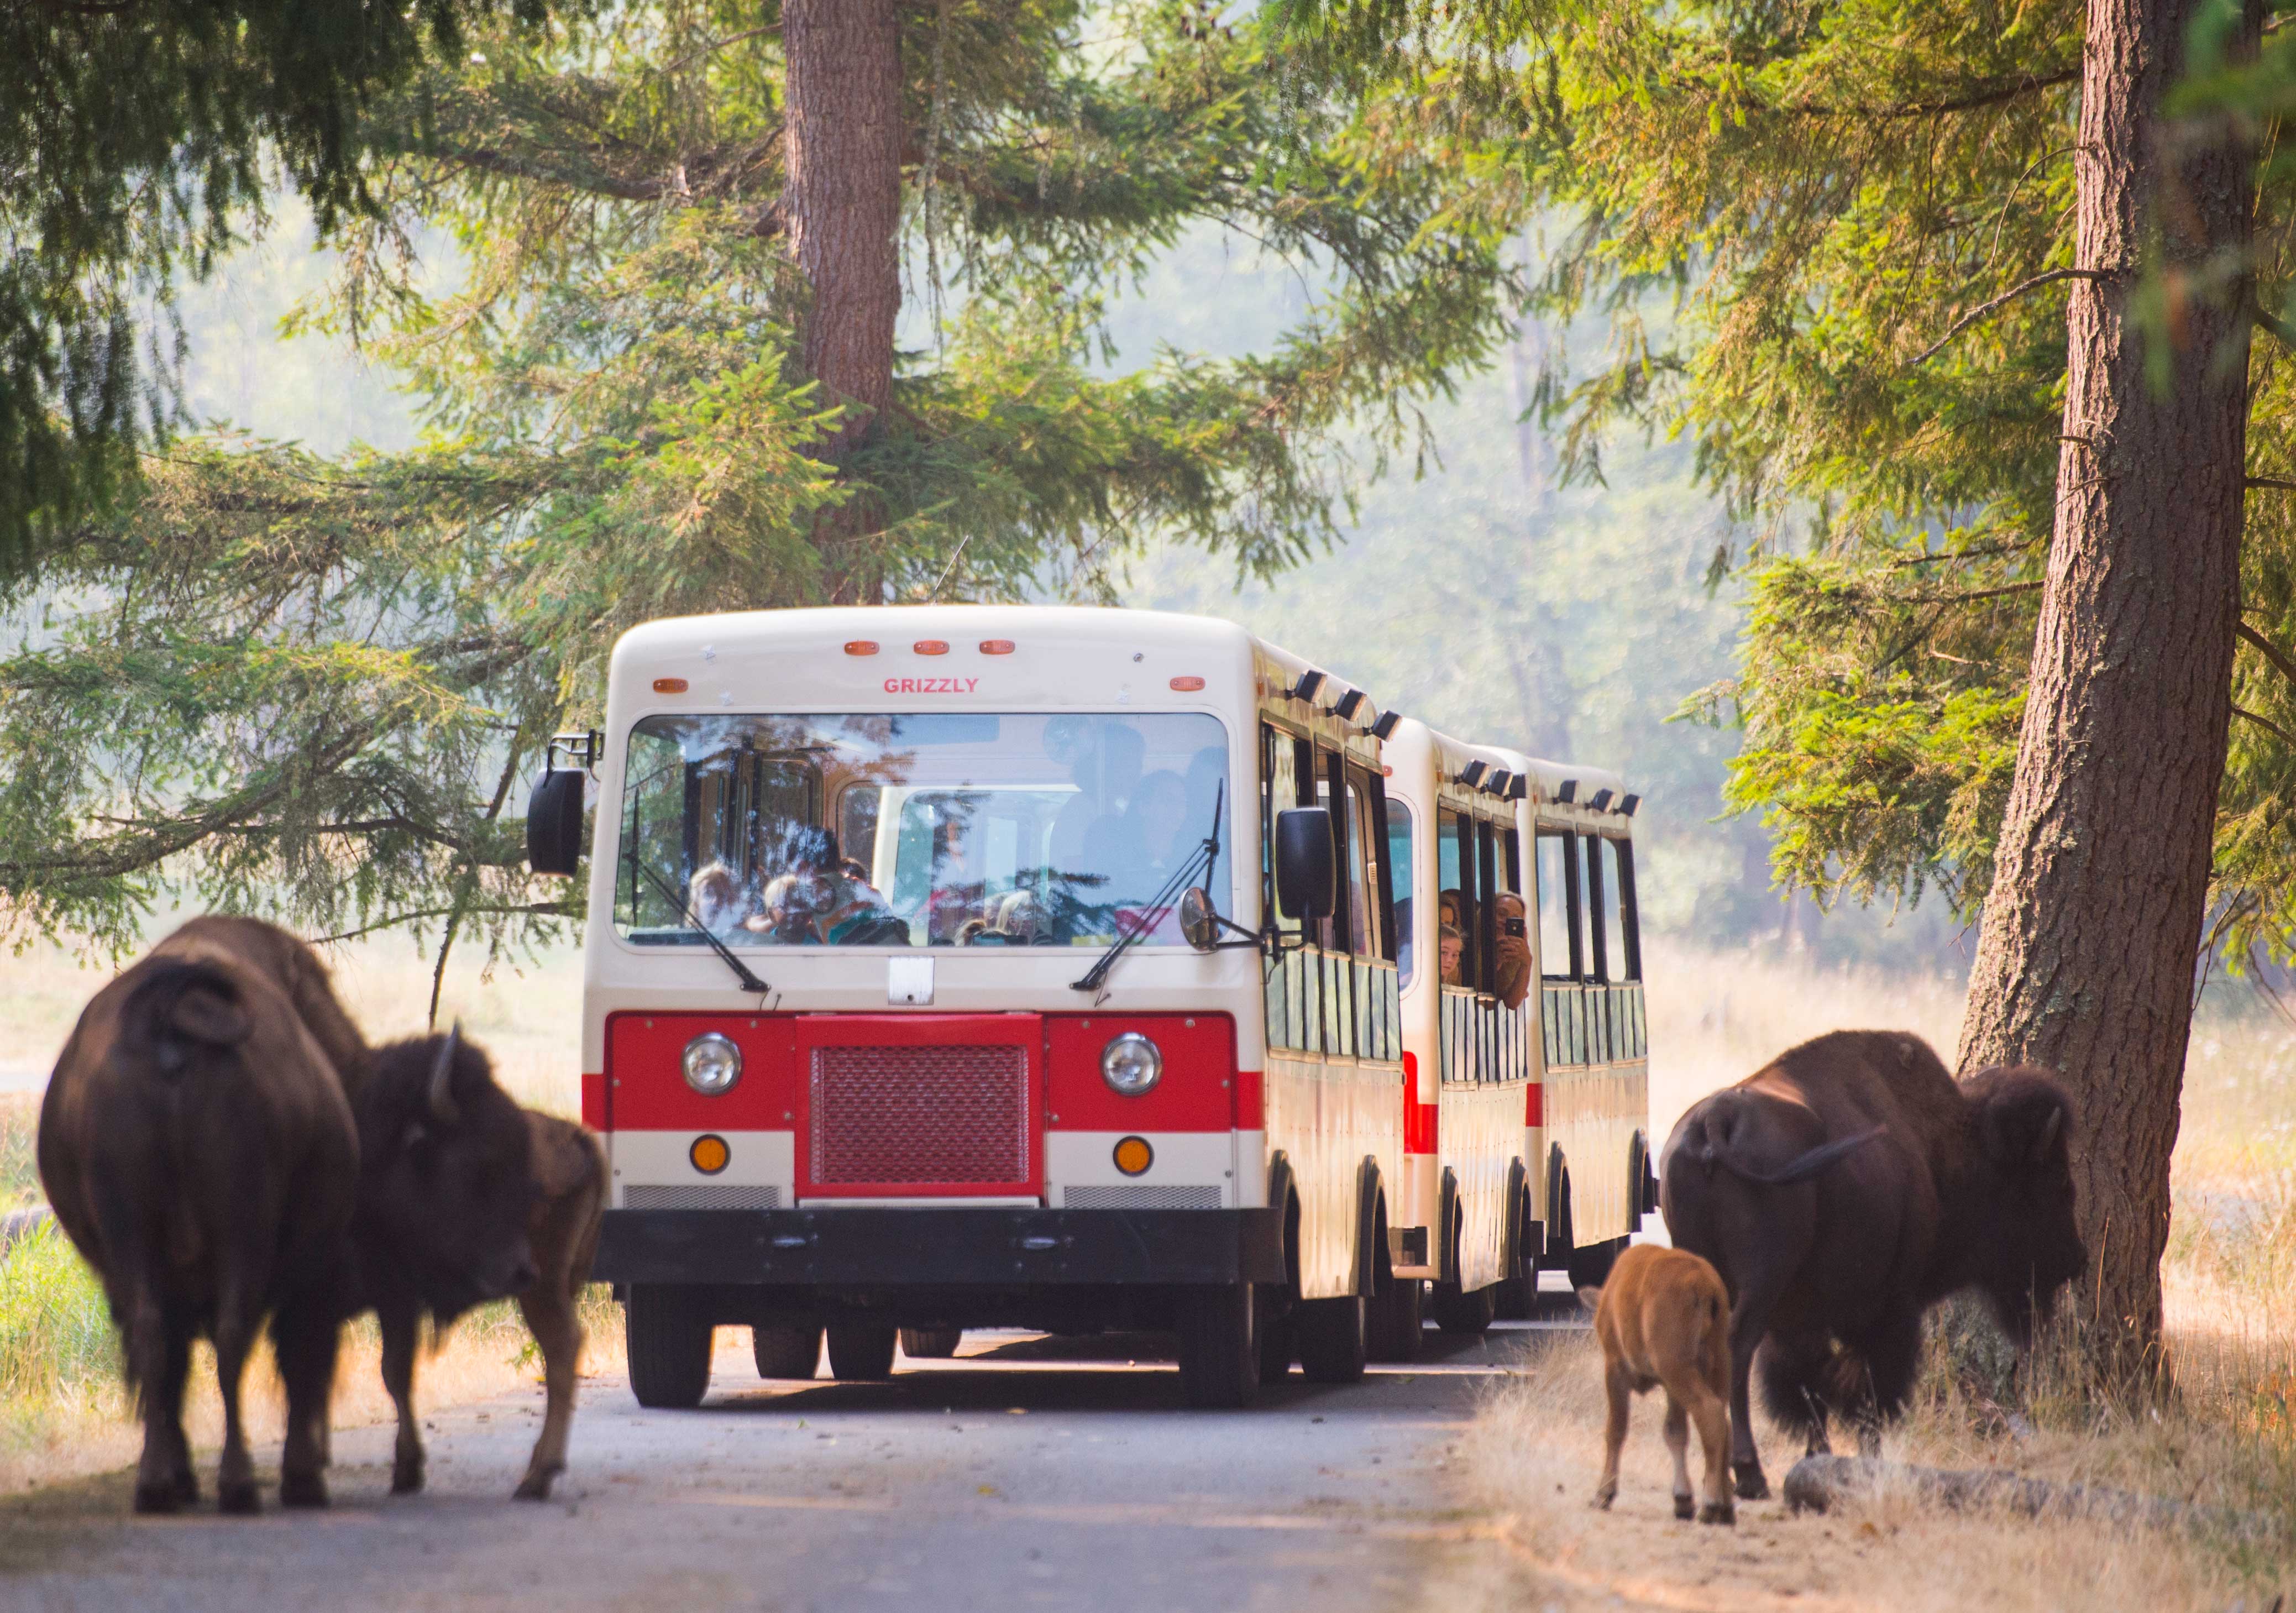 Tram going through trees with bison